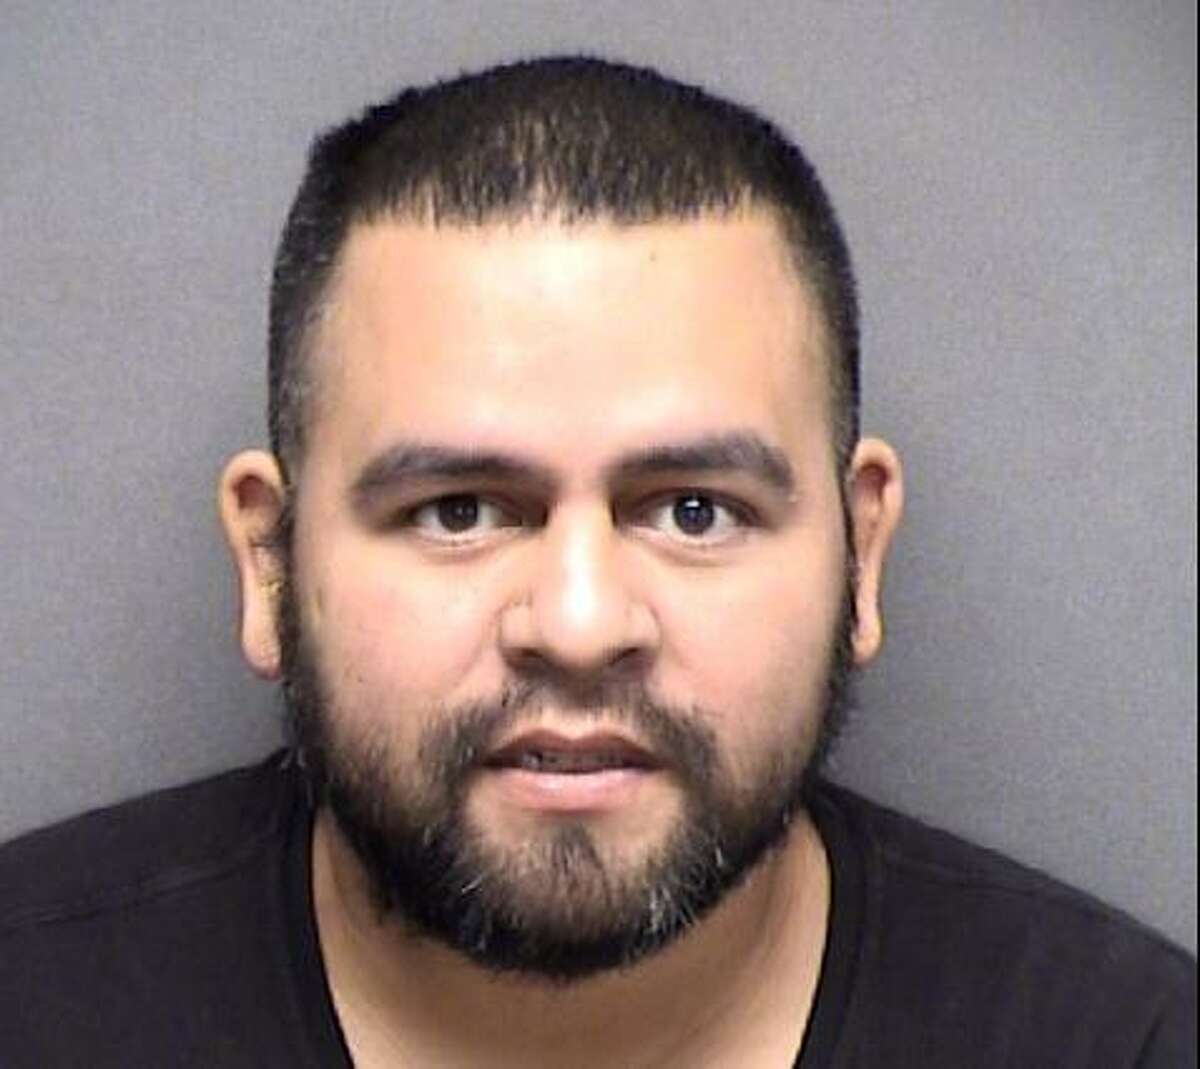 Juan Antonio Trevino has been indicted on a murder charge in connection with the fatal shooting of Eric Cuellar on March 6, 2022.